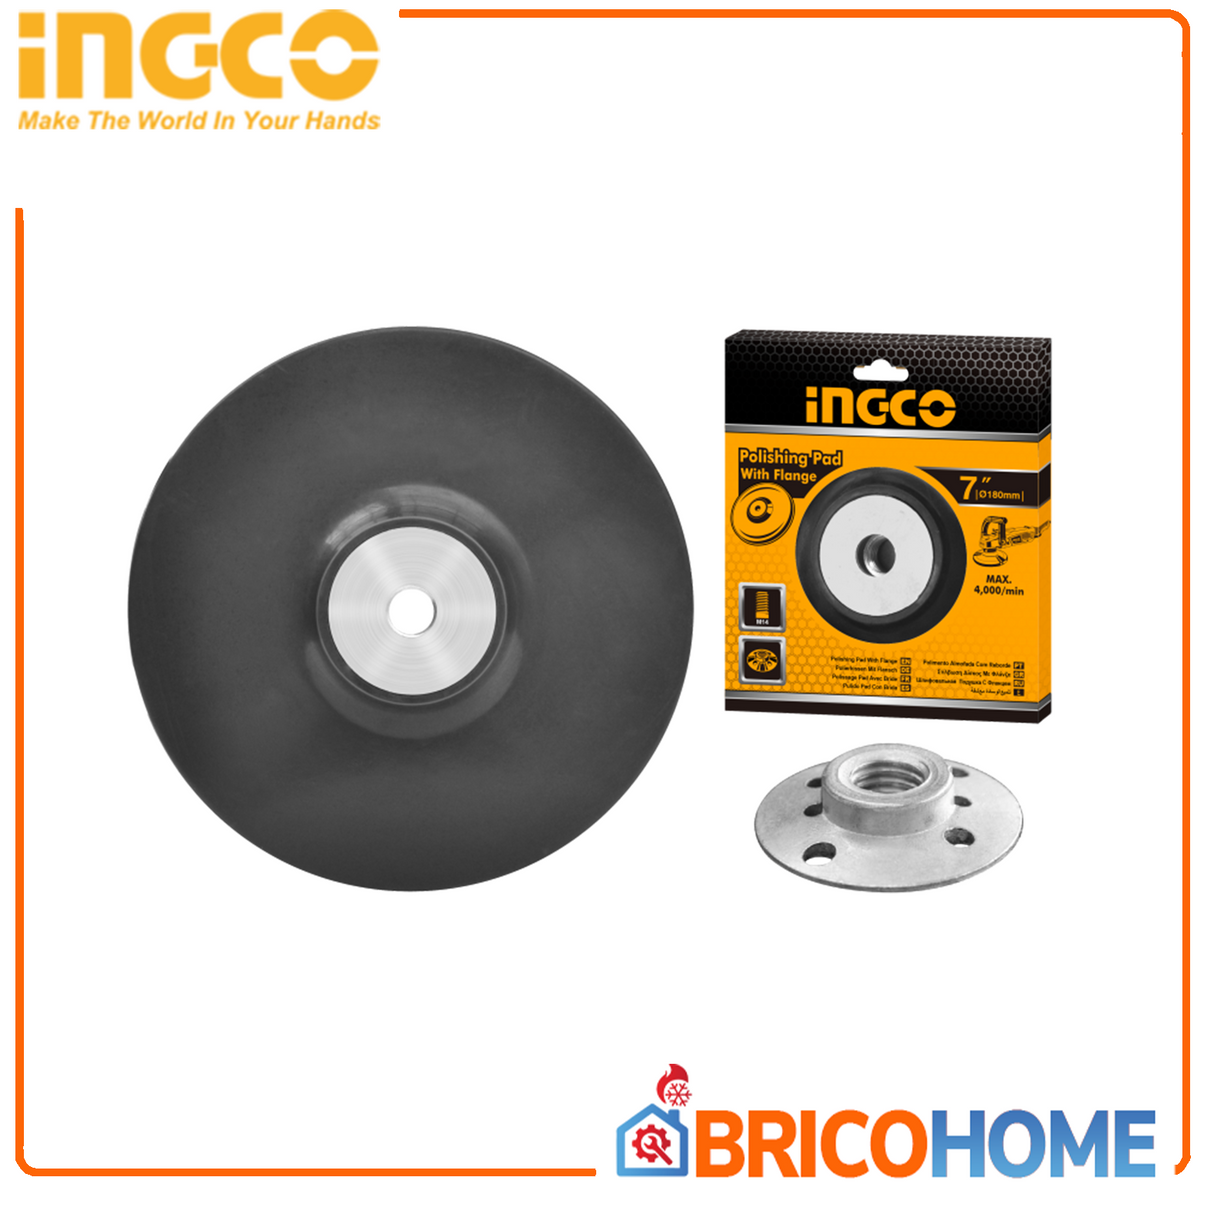 Spare backing pad for INGCO polisher